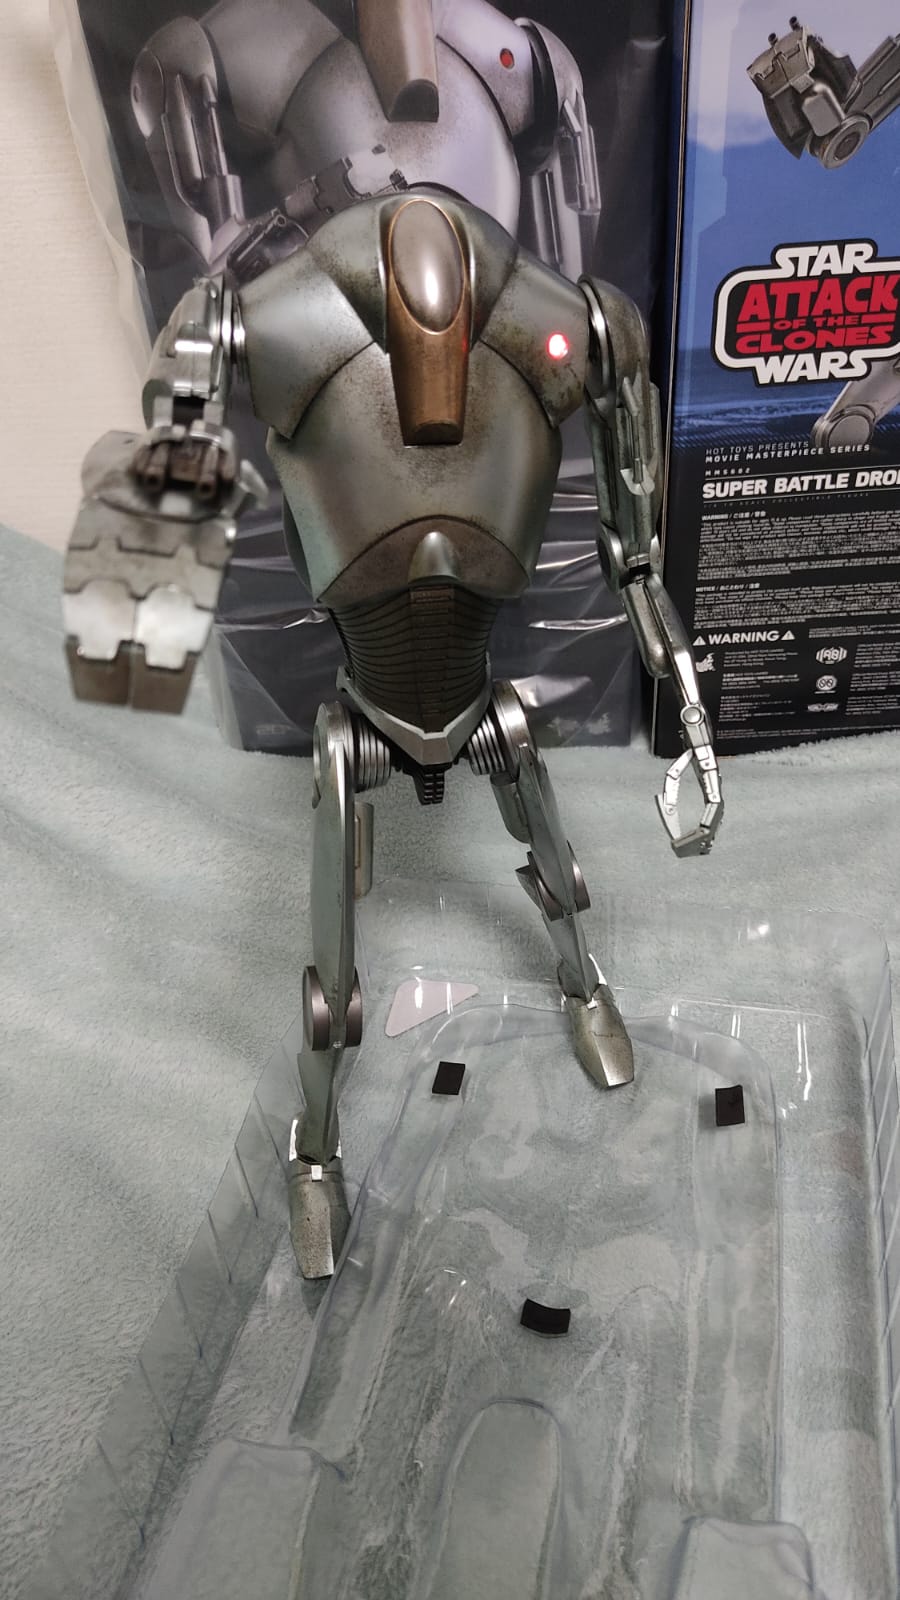 movie - NEW PRODUCT: HOT TOYS: STAR WARS EPISODE II: ATTACK OF THE CLONES™ SUPER BATTLE DROID™ 1/6TH SCALE COLLECTIBLE FIGURE Whats162